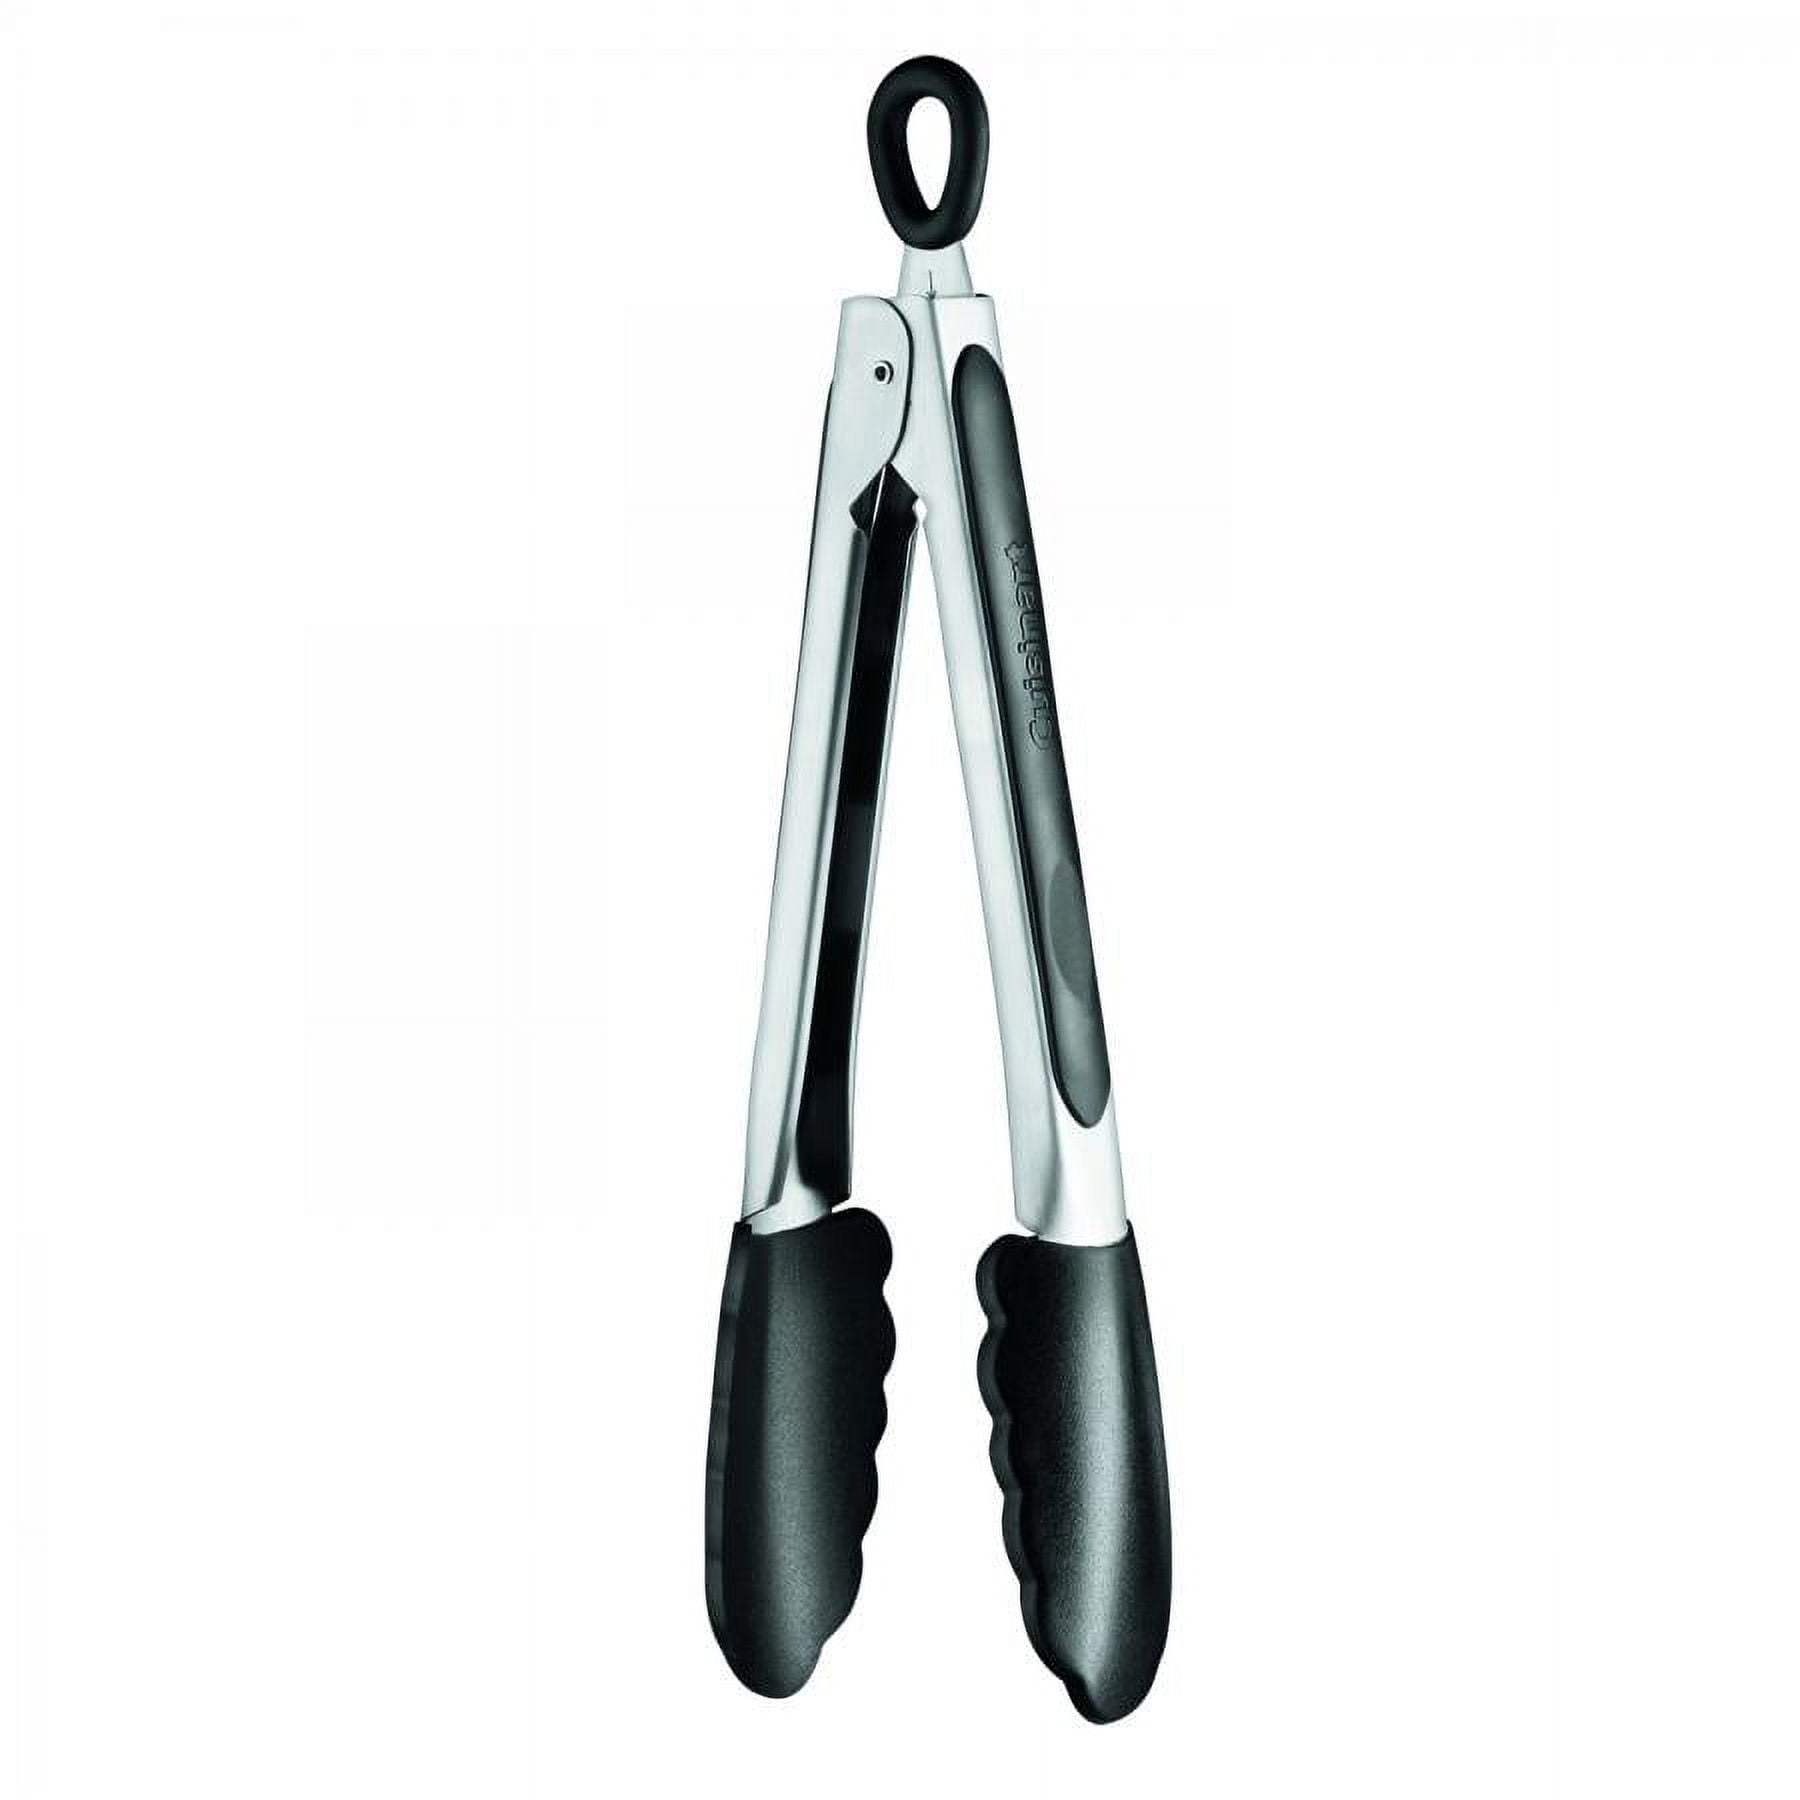 9" Cuisinart Stainless Steel Silicone-Tipped Kitchen Tongs (Black) $5.10 + Free Shipping w/ Walmart + or on orders $35+